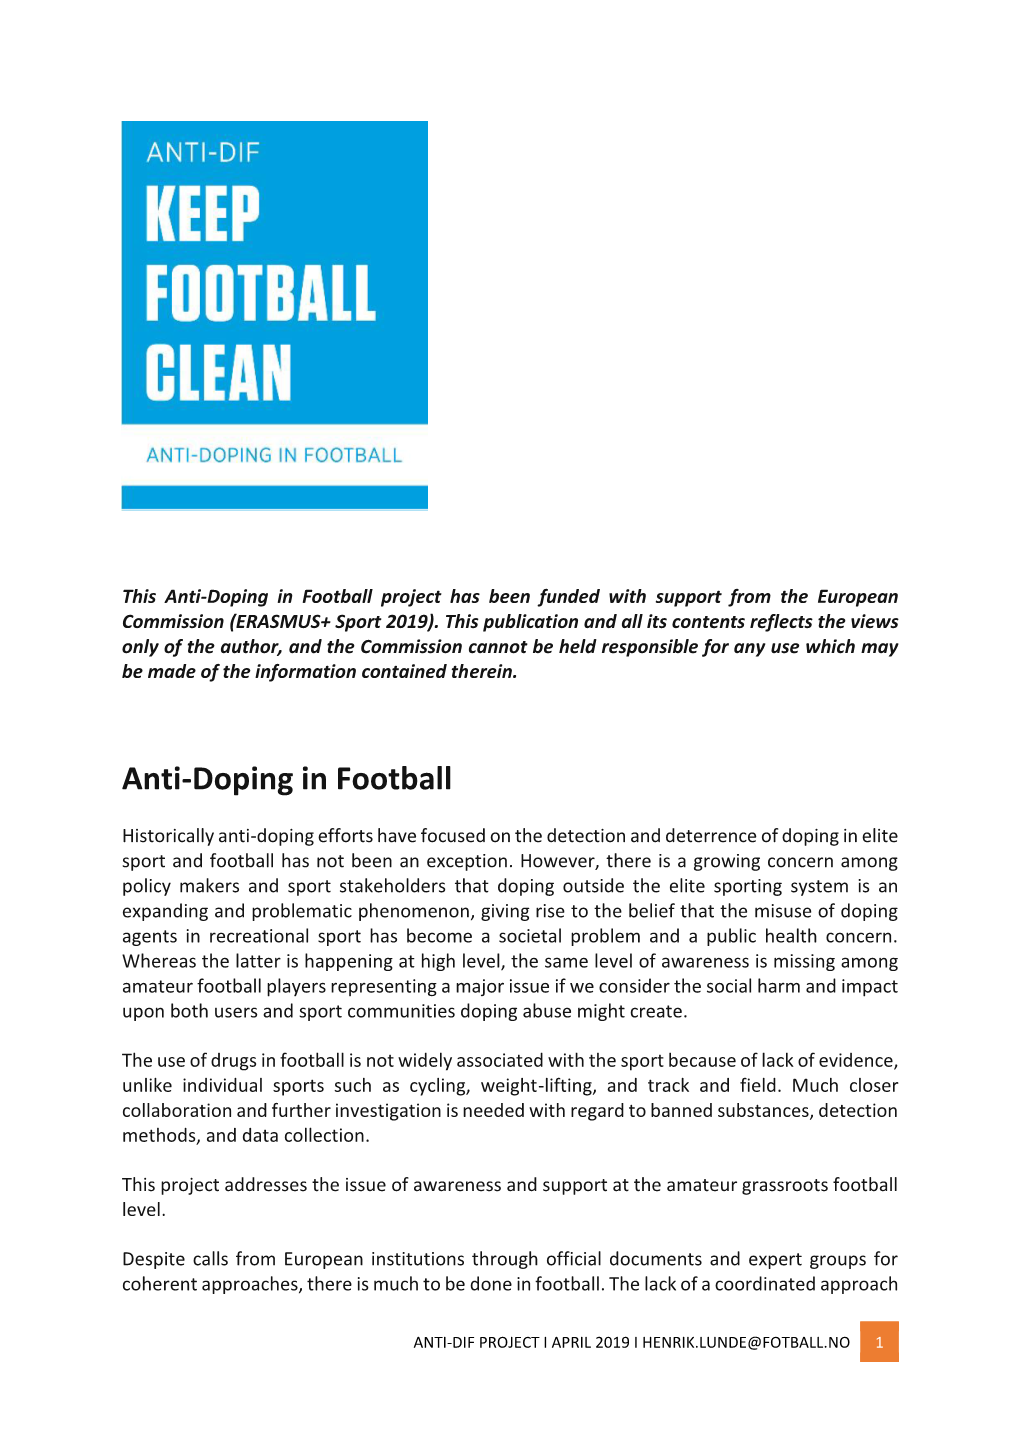 Anti-Doping in Football Project Has Been Funded with Support from the European Commission (ERASMUS+ Sport 2019)